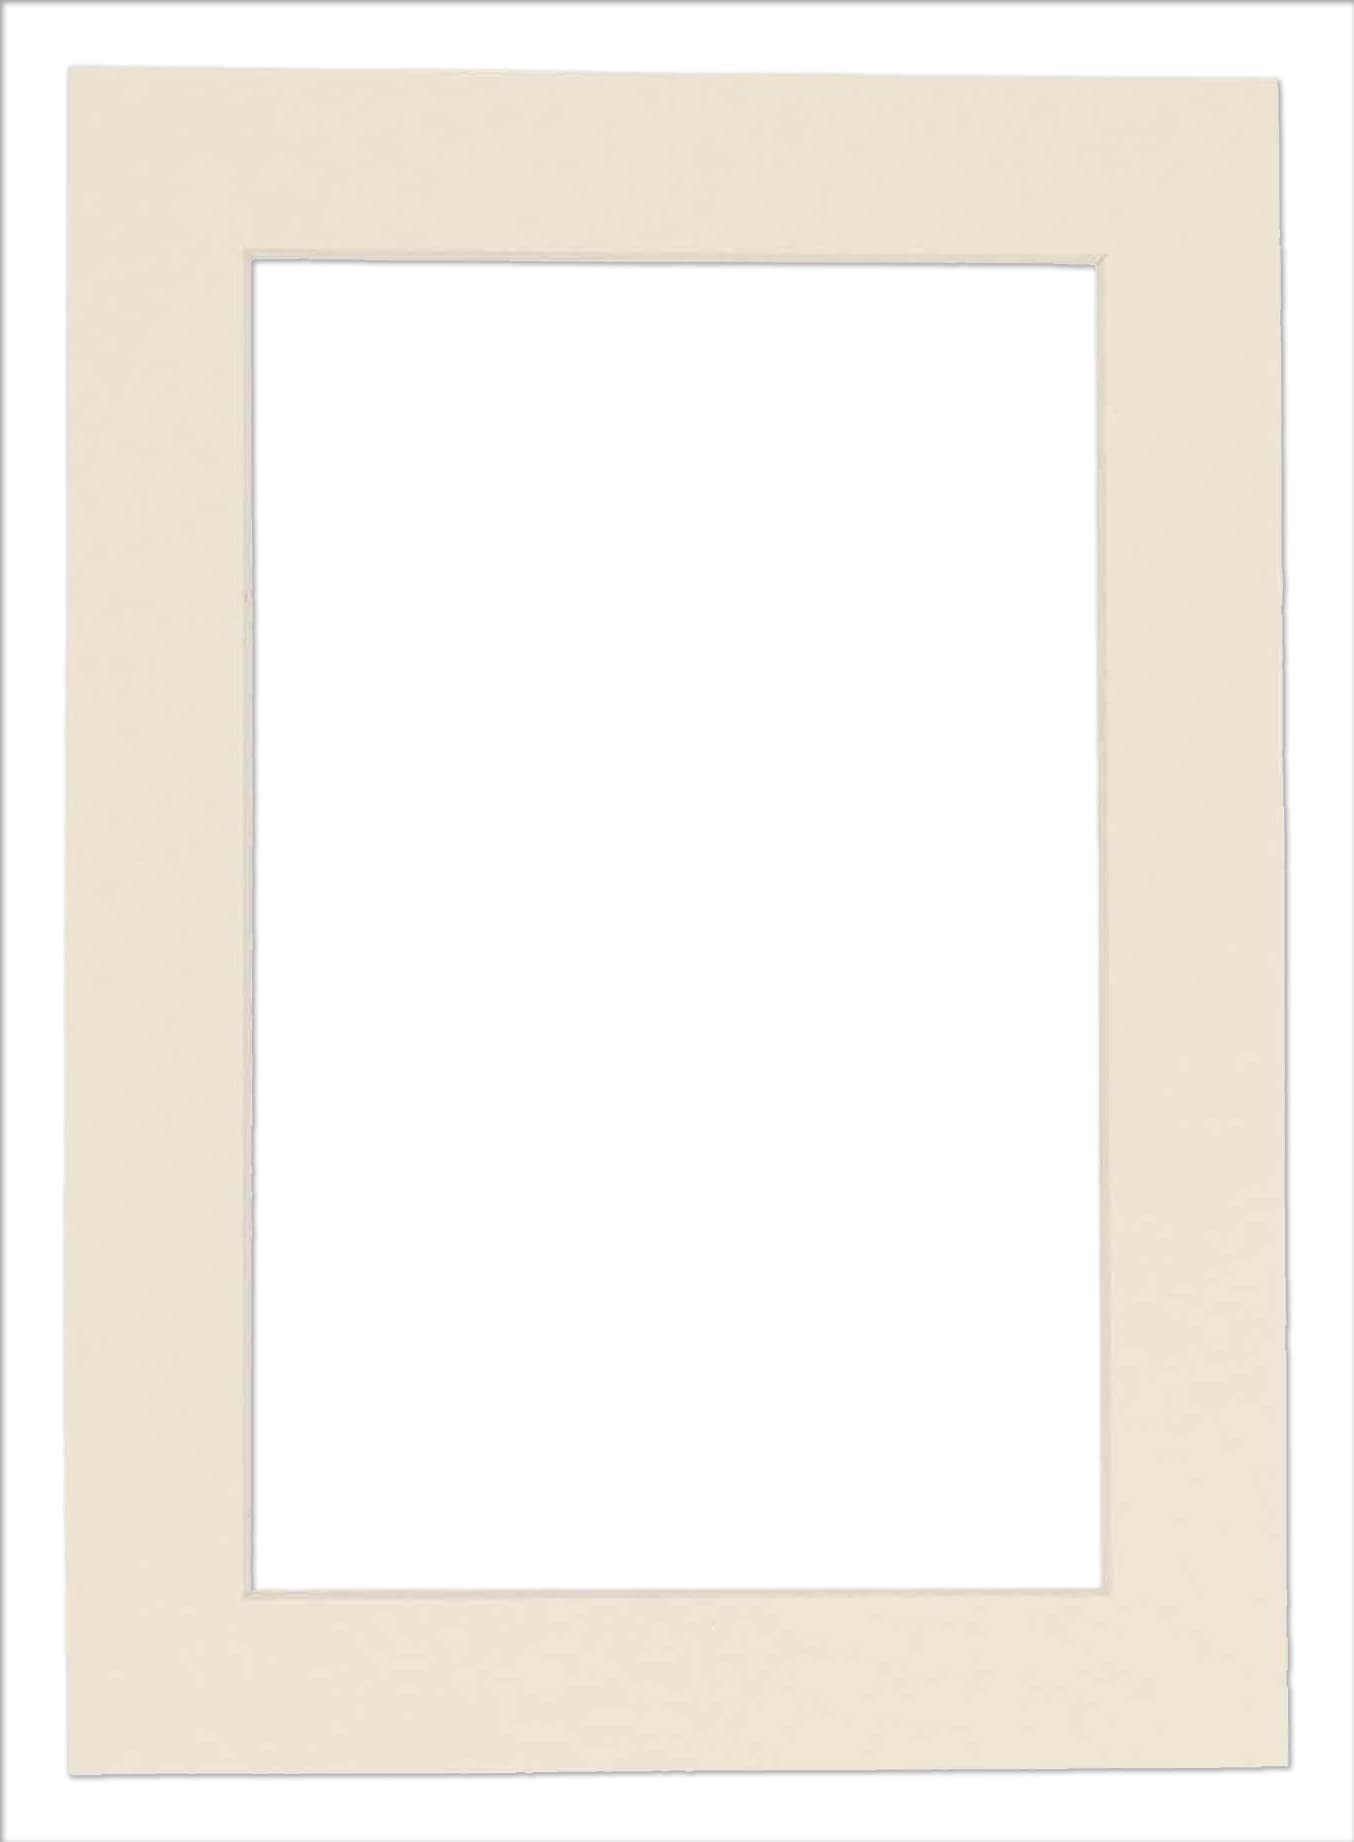 Poster Palooza 11X14 Mat Bevel Cut For 9X12 Photos - Acid Free Textured Cream Precut Matboard - For Pictures, Photos, Framing - 4-Ply Thickness